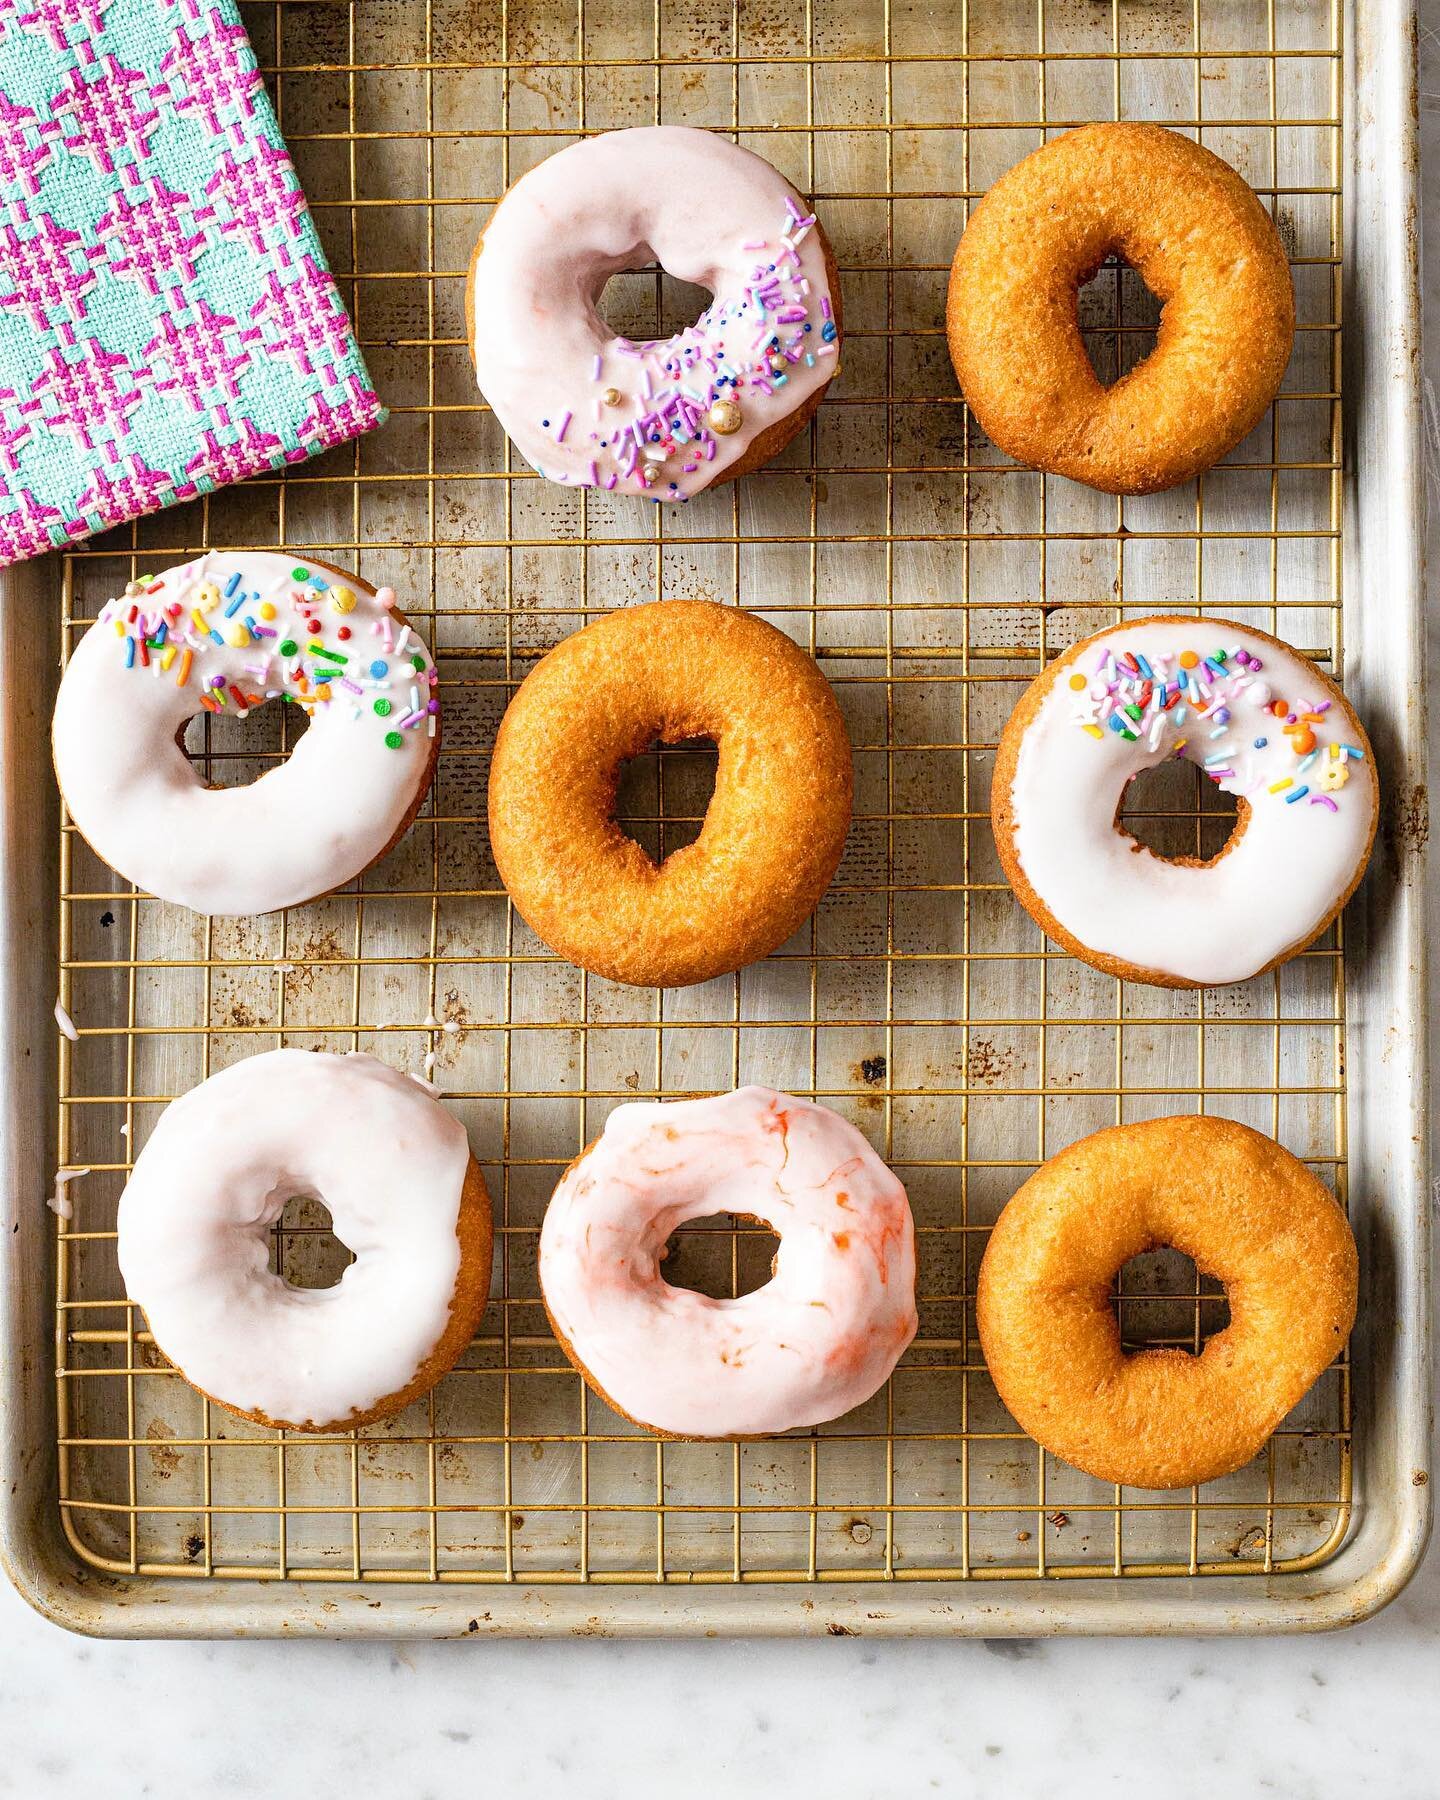 how do you like to dress up your doughnuts? We love light, pastel glazes with bright candied toppings💛

and want the in on a little topping secret ~ cube trays or cupcake pans are a good way to sort your toppings (for the slightly organized obsessed